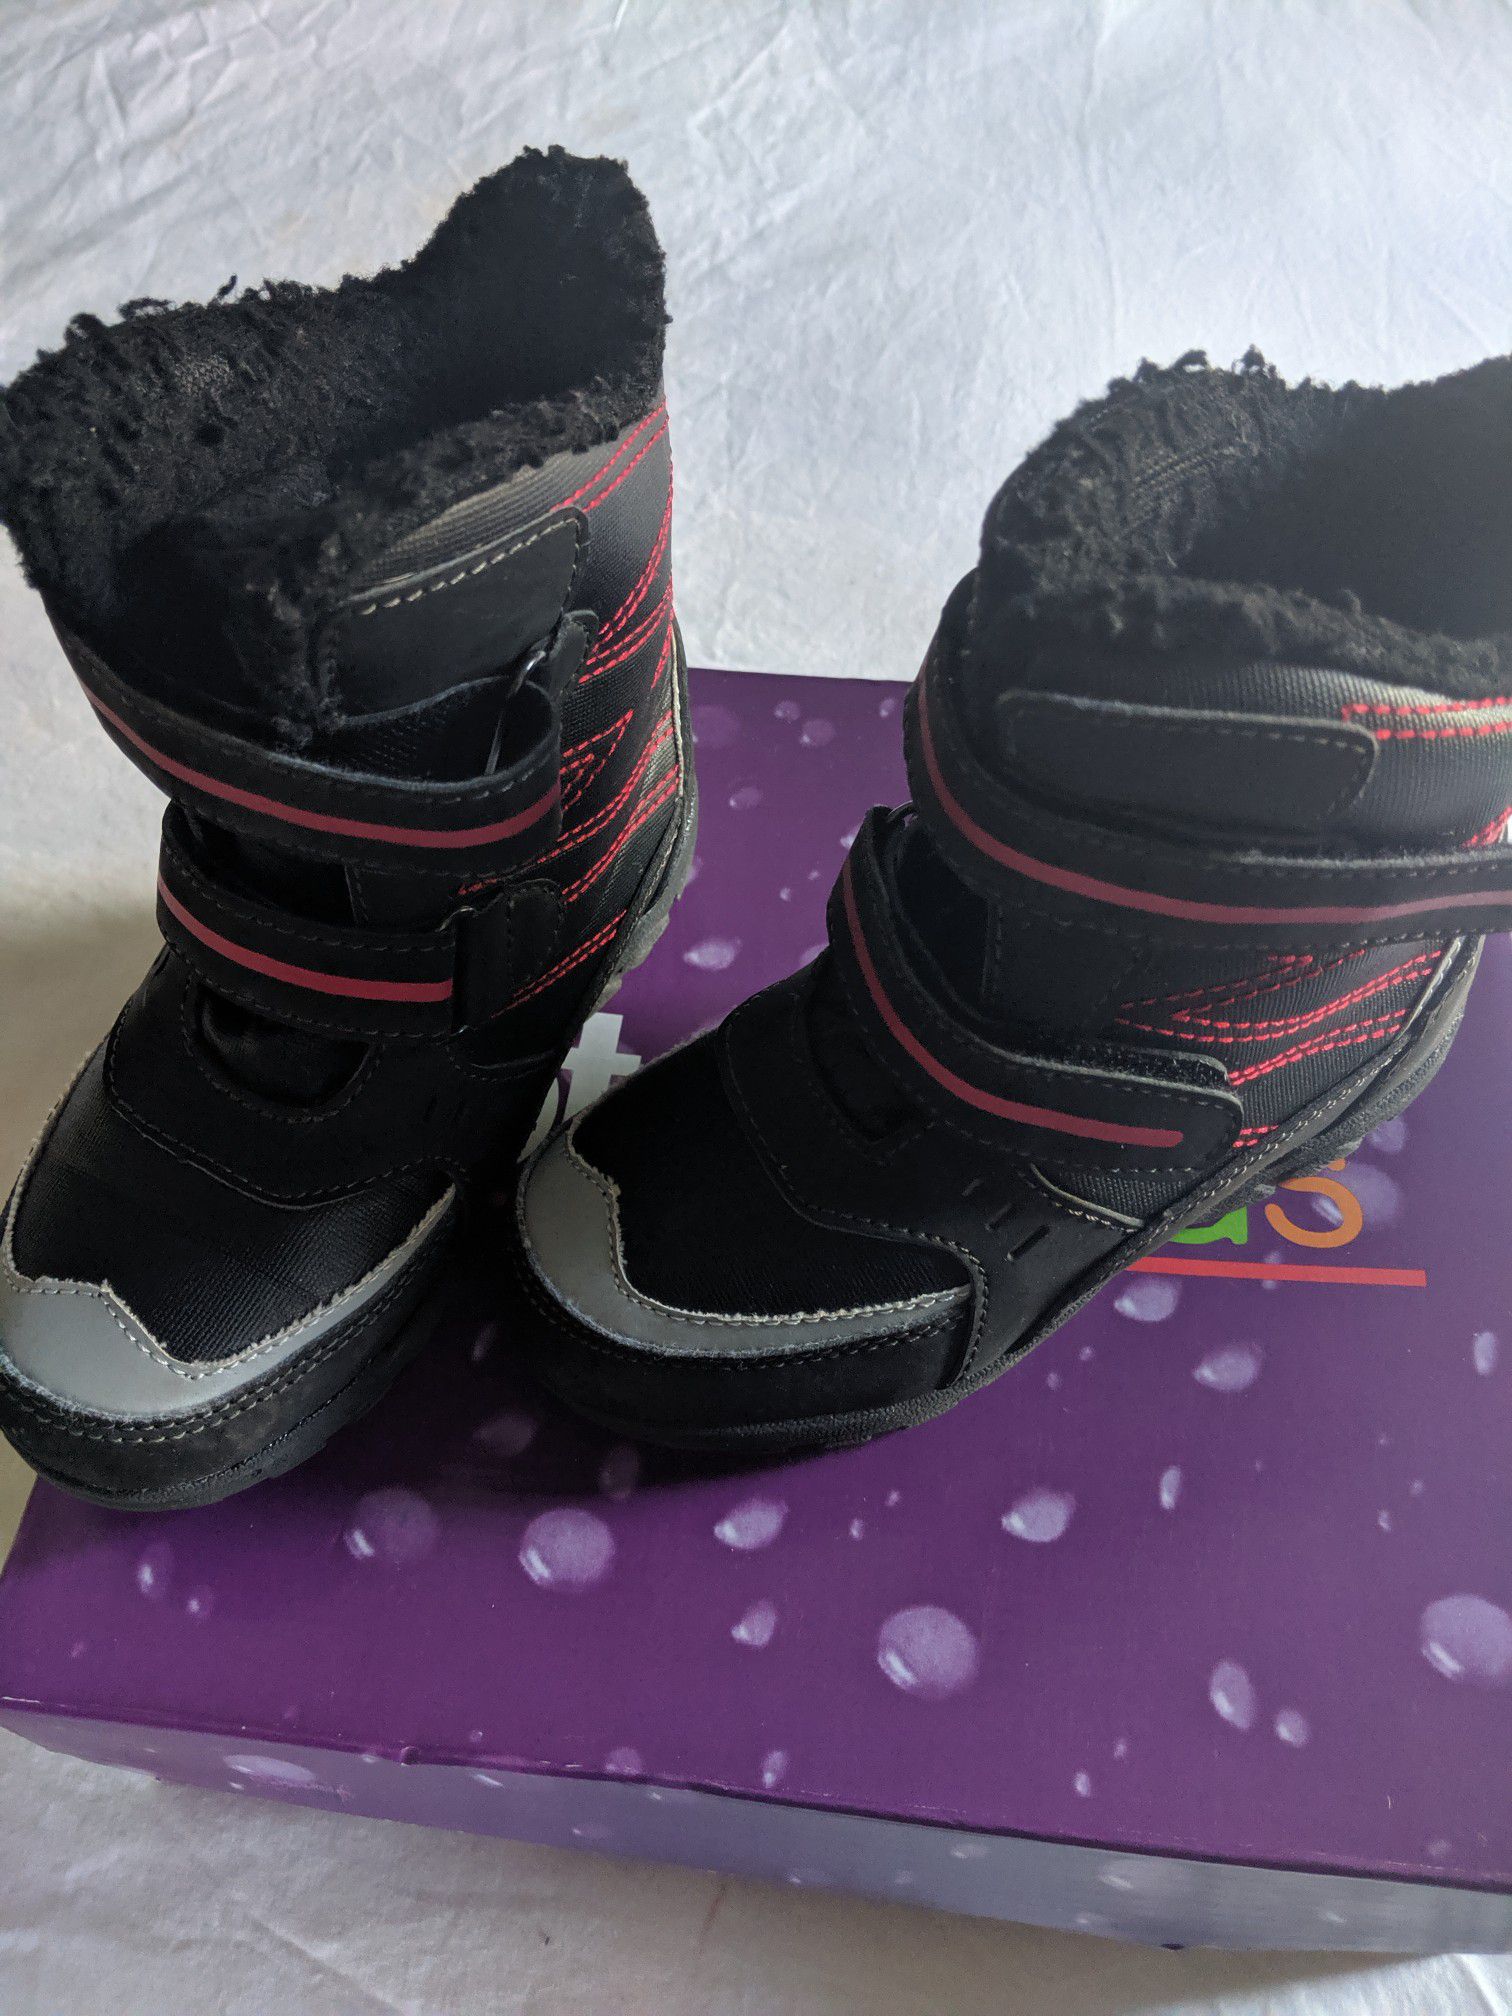 Totes Kids Winter Boots!